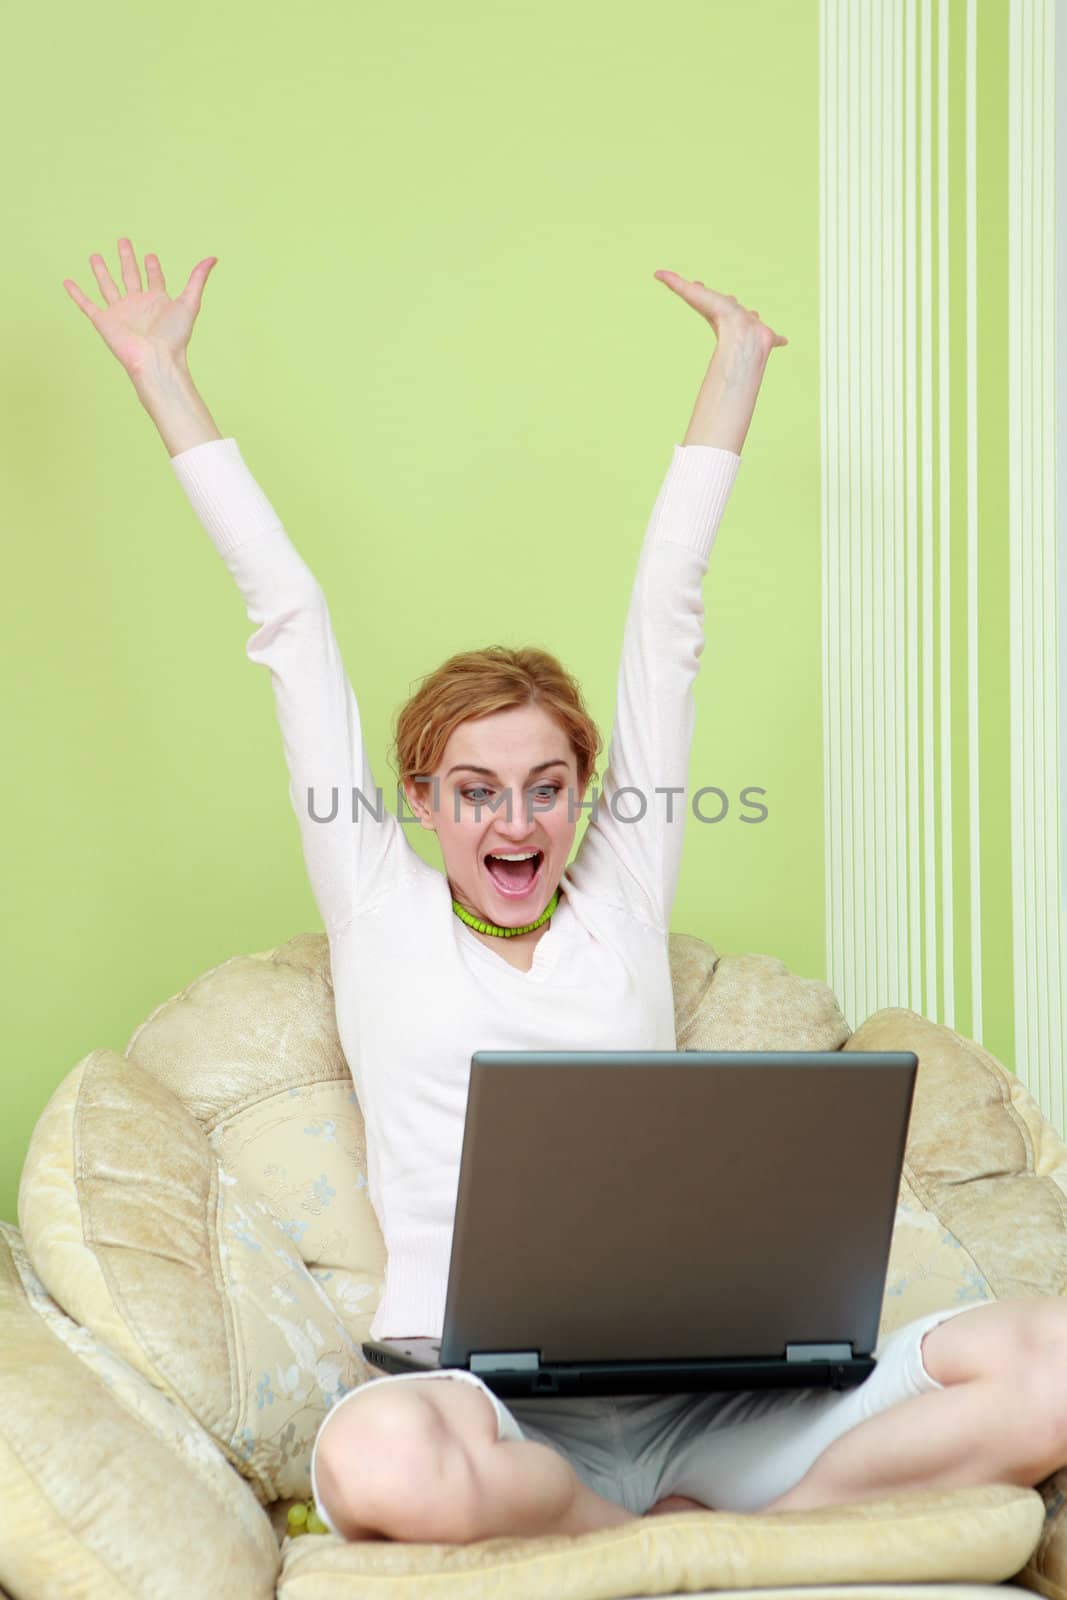 An image of nice girl with a laptop at home